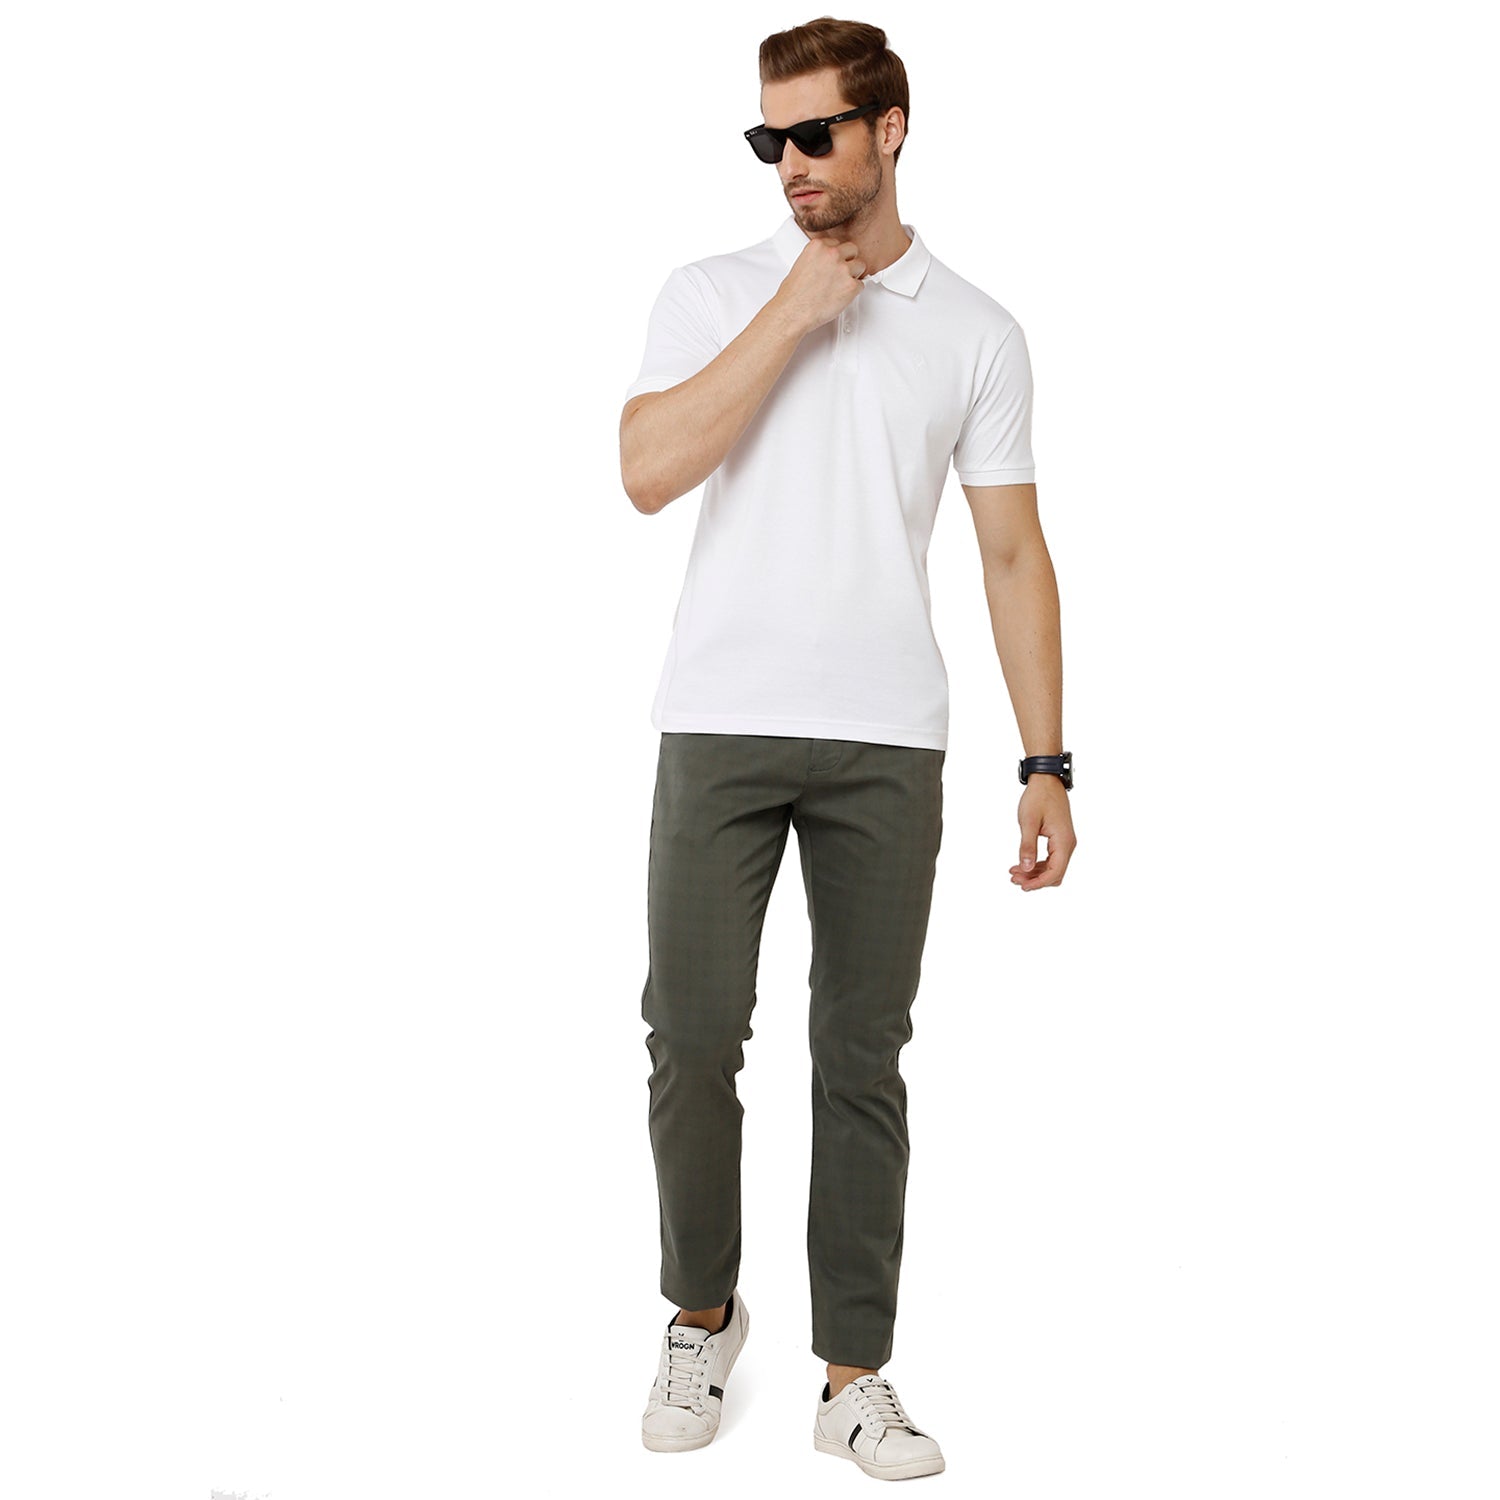 Classic Polo Mens 100% Cotton Half Sleeve Solid Slim Fit White Color Polo Neck T-Shirt - UNICO 59 A T-shirt Classic Polo 